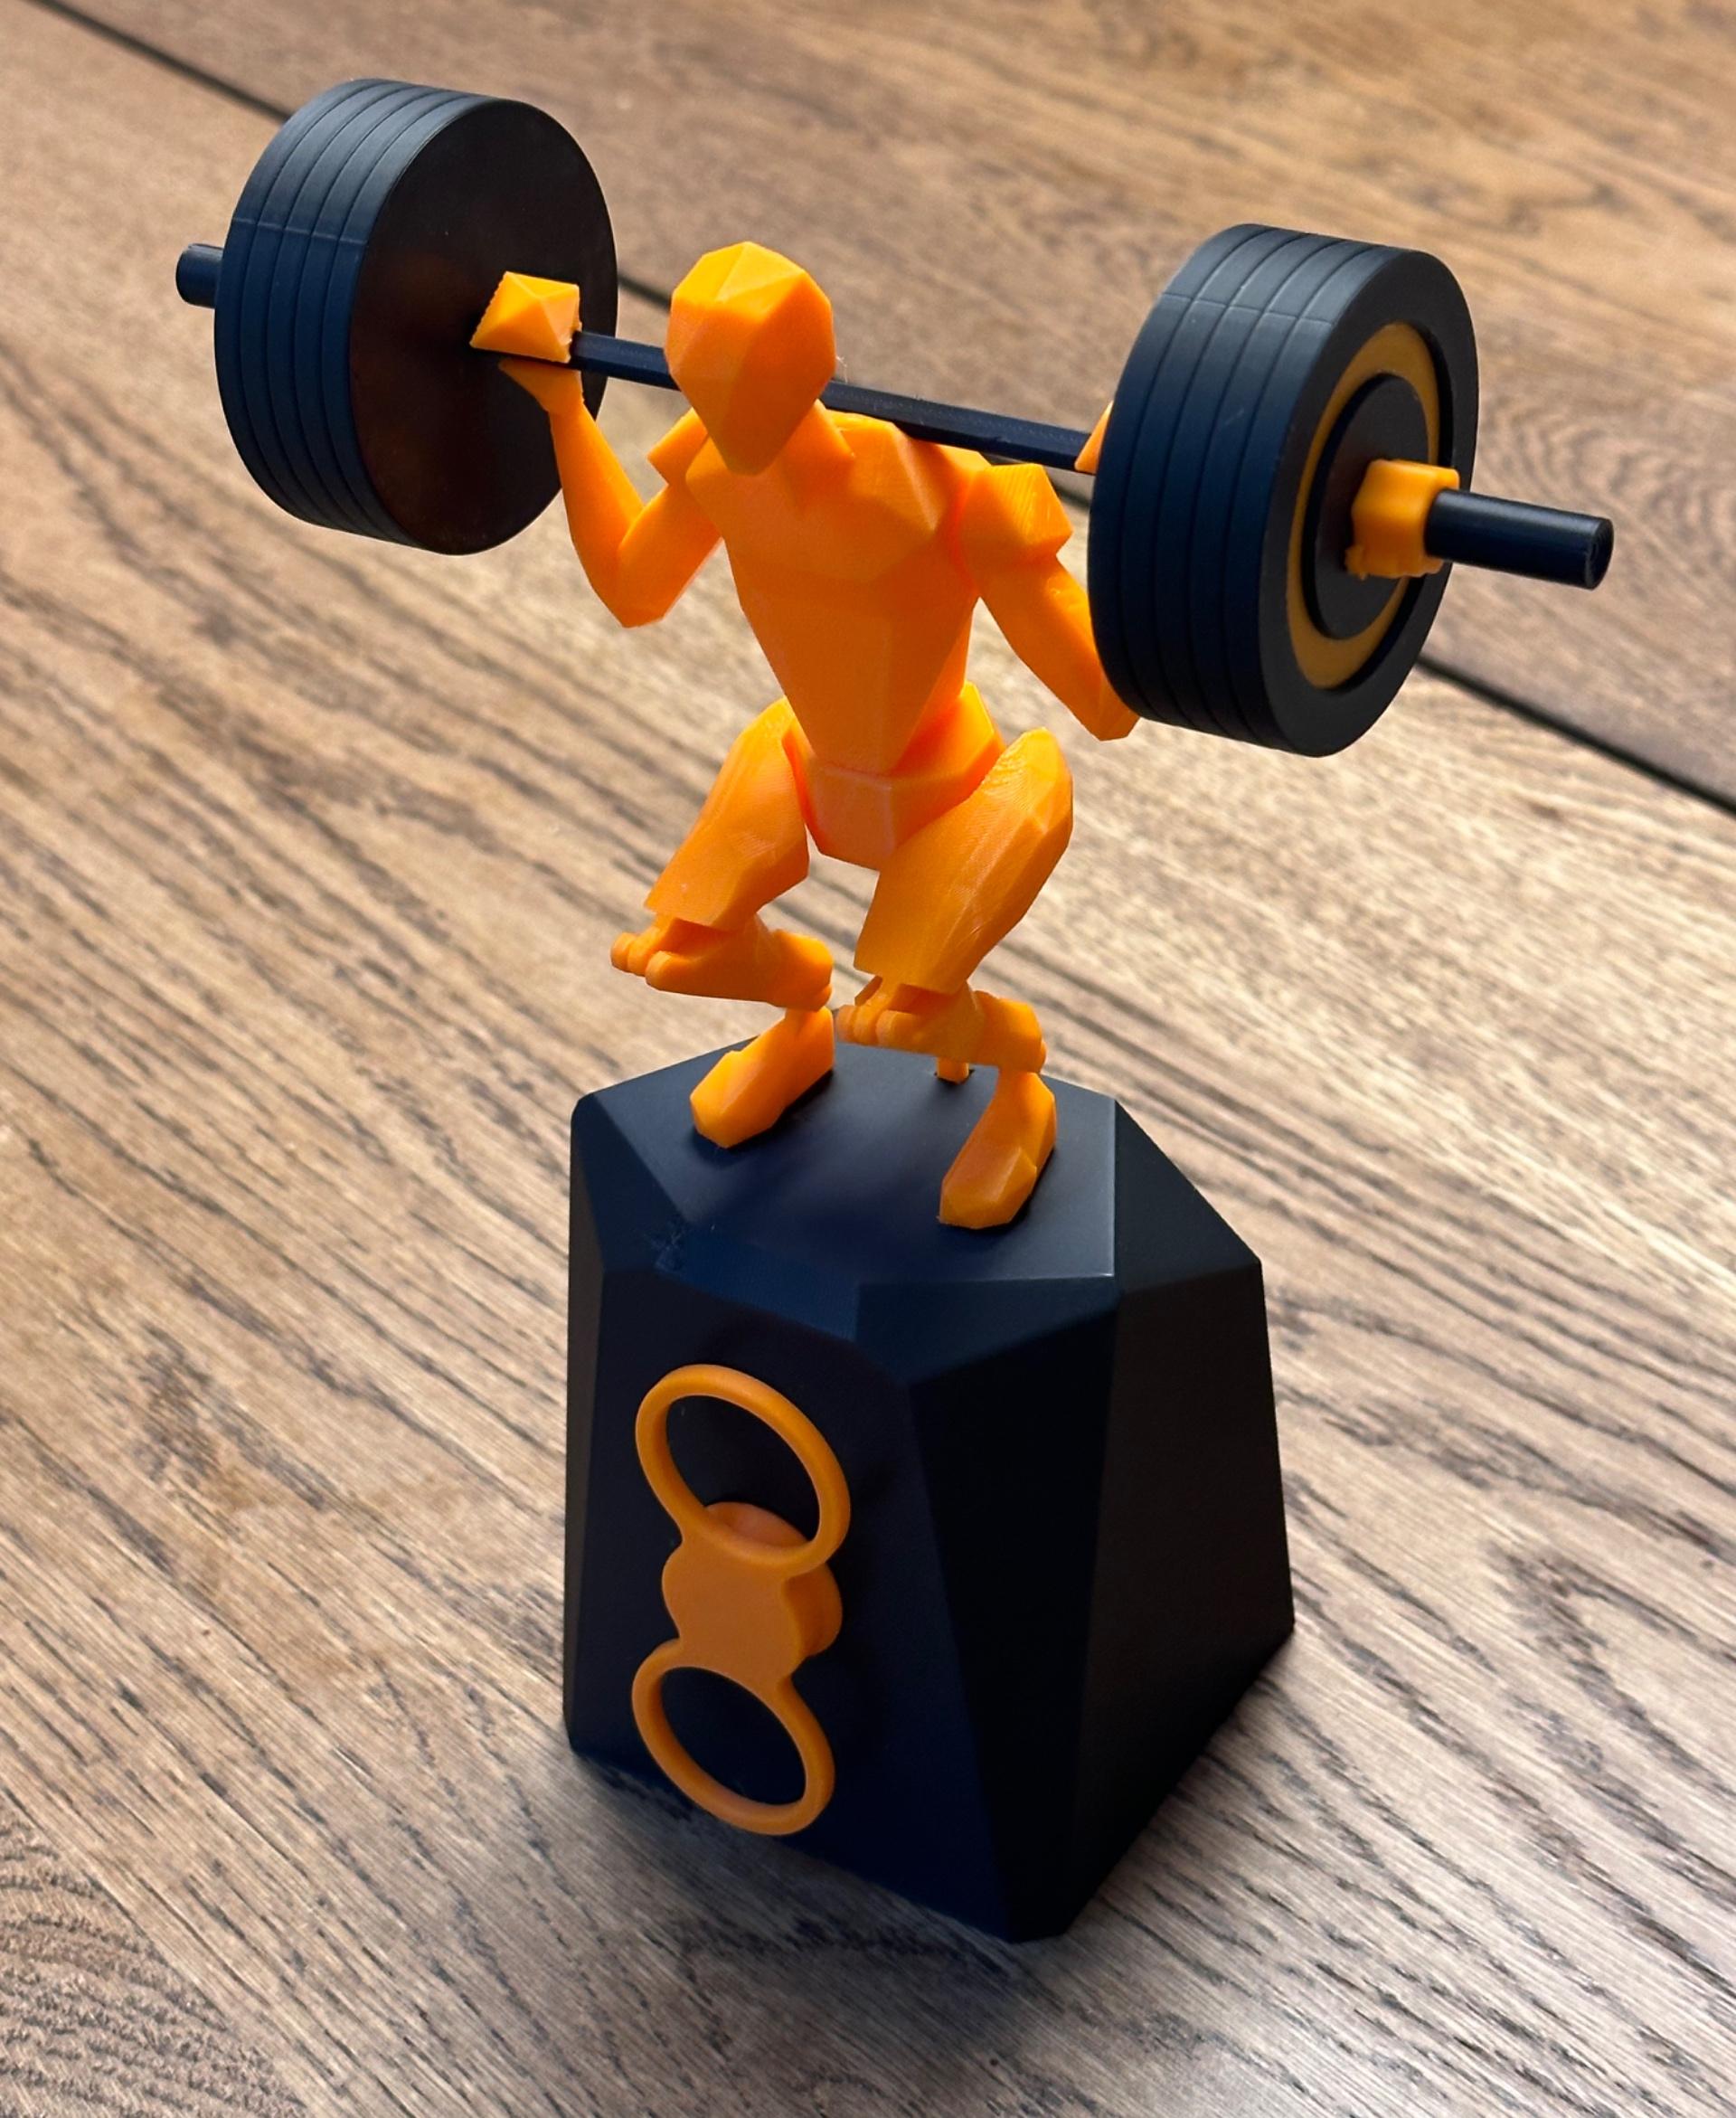 Squat Automata  - Printed on ender 3 in sunlu pla
Very fun model , really like it!  - 3d model